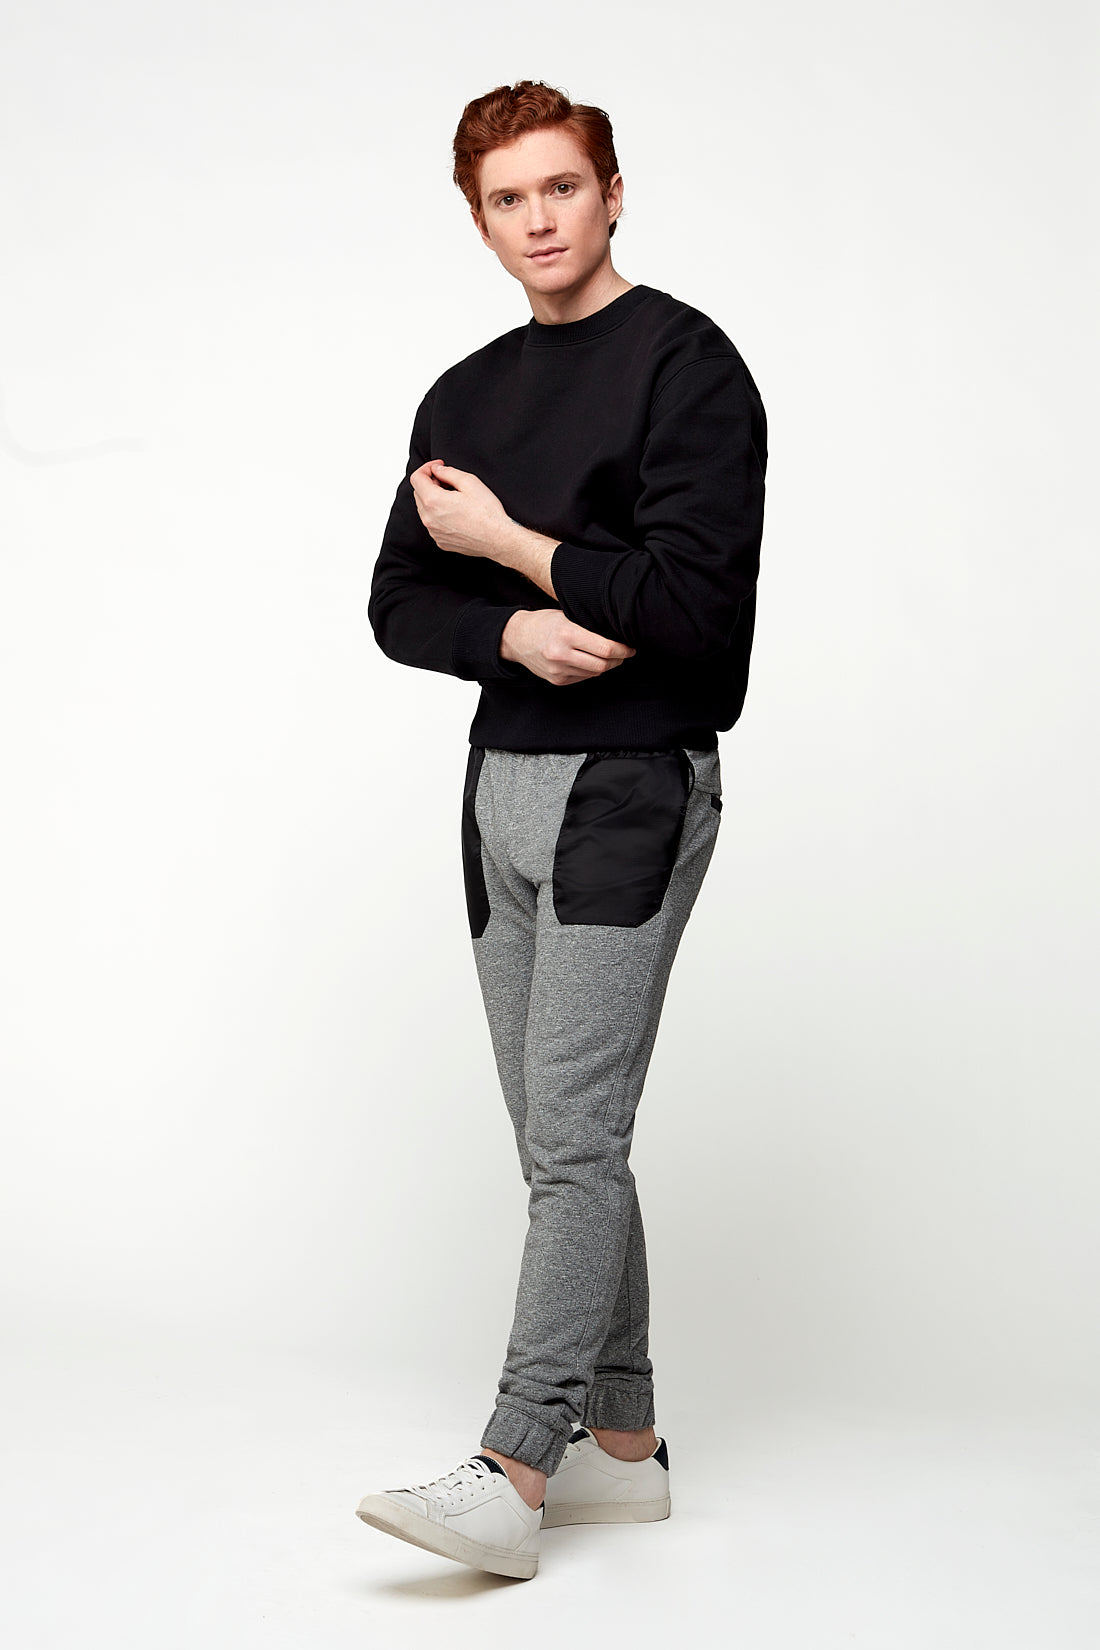 AXEL - Pull-On French Terry Jogger - Grey Heather - DENIM SOCIETY™